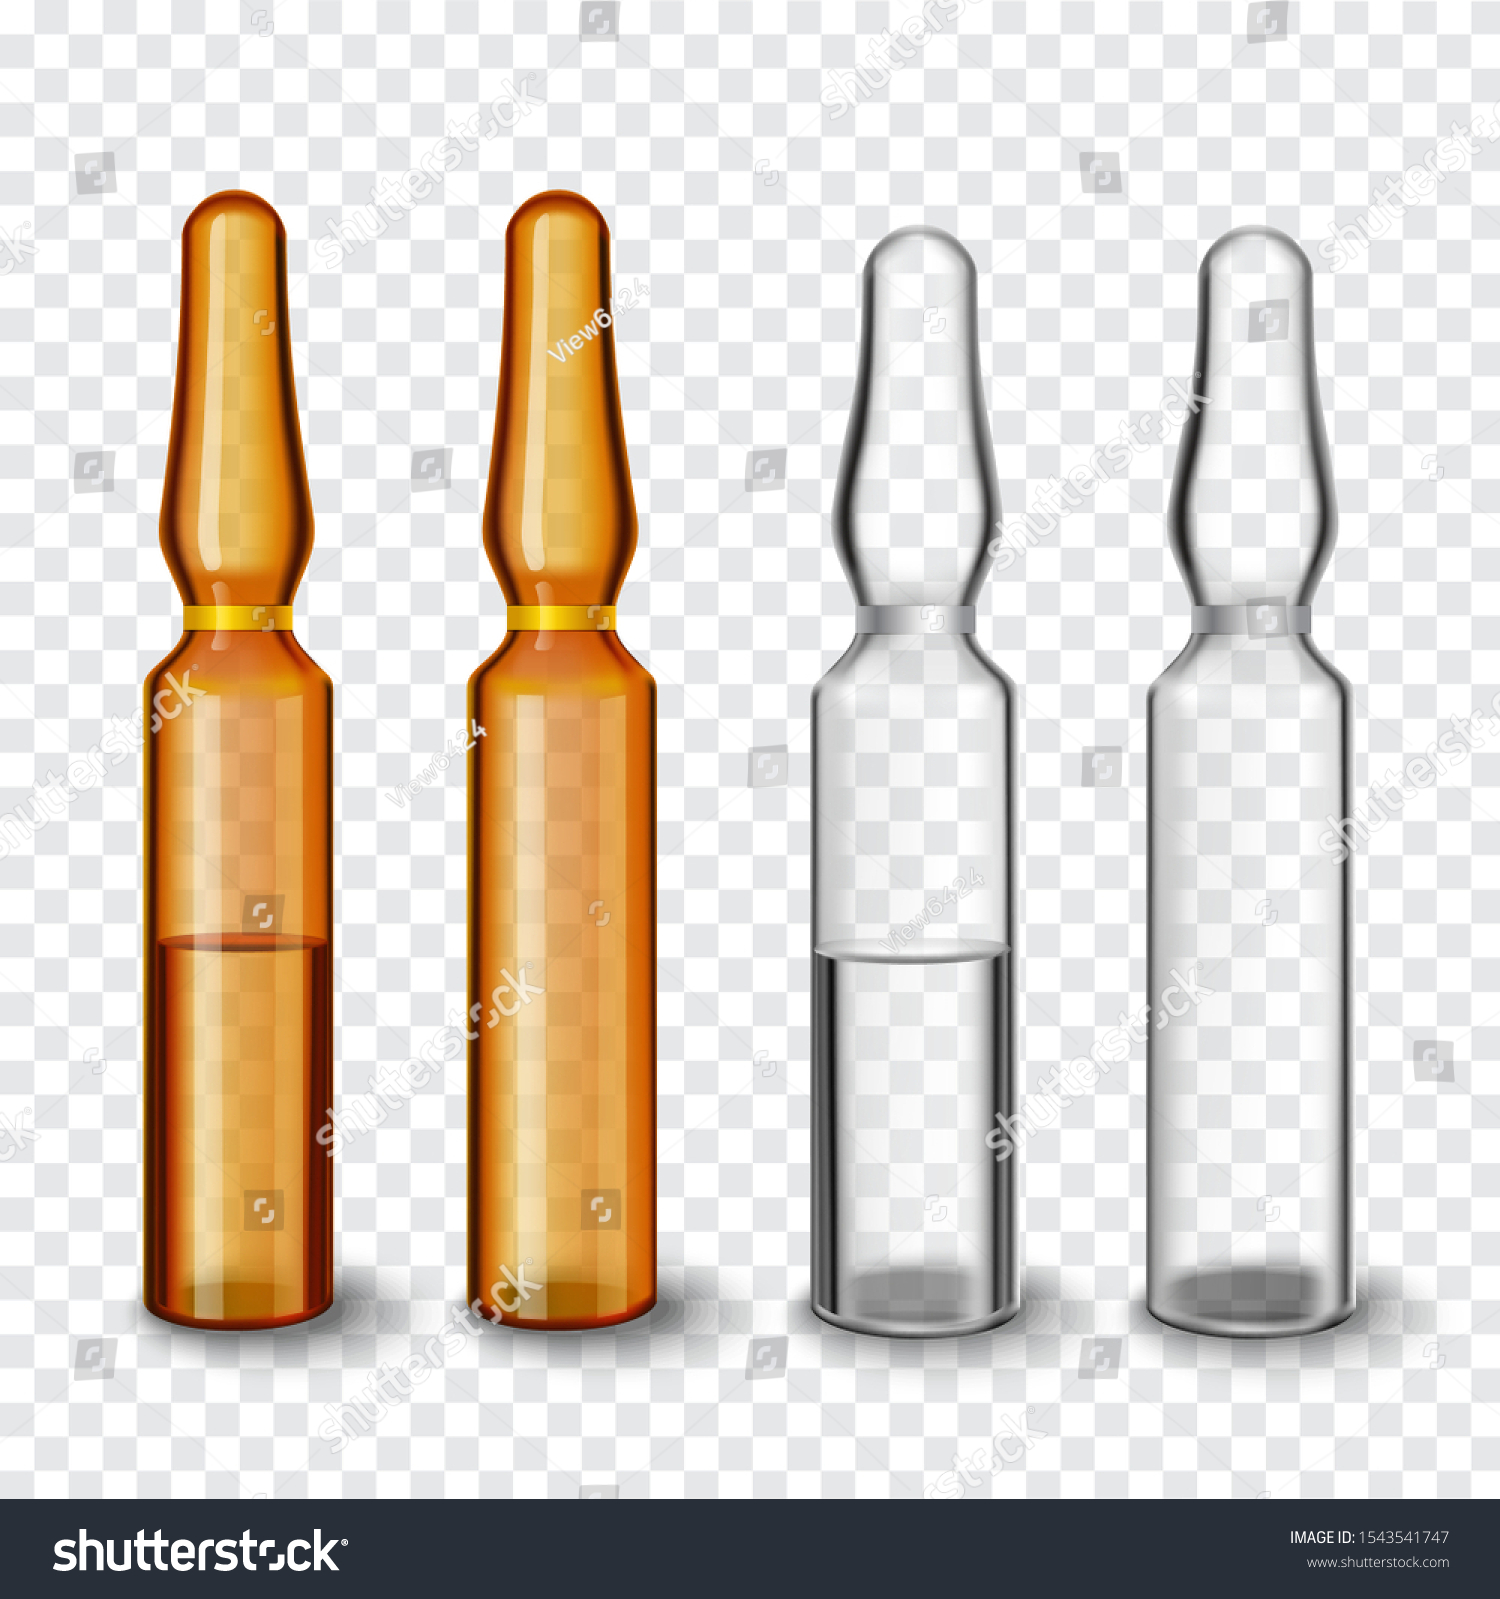 Download Transparent Glass Ampoules Vector Illustration Stock Vector Royalty Free 1543541747 Yellowimages Mockups